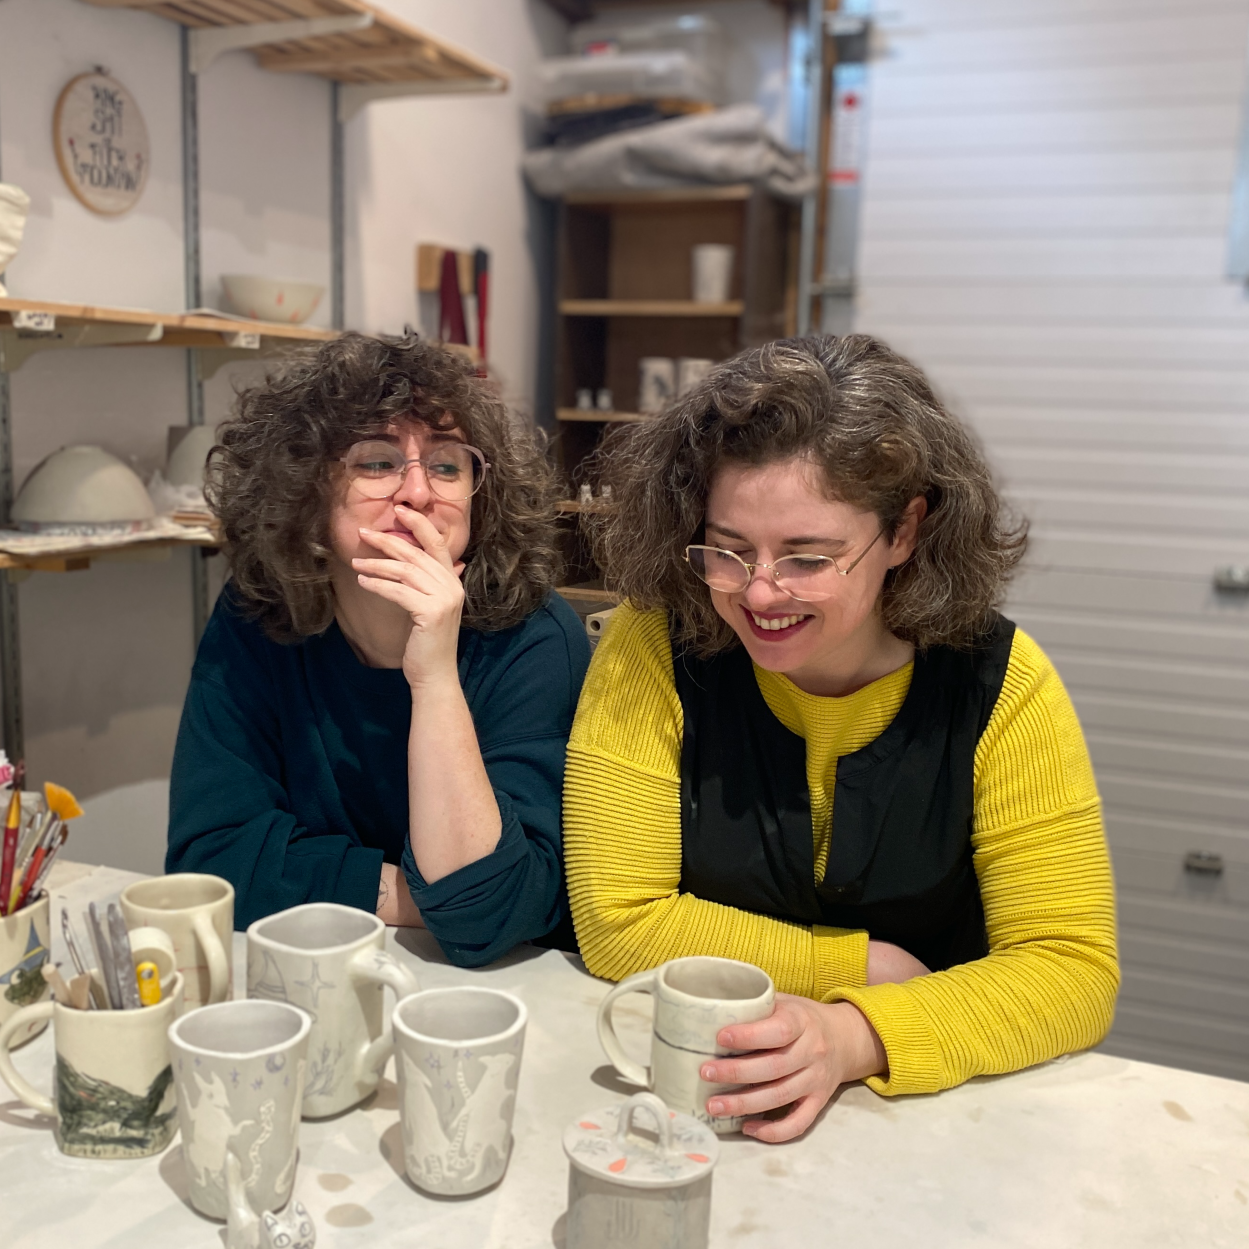 A photograph of Cass and Maia. Cass is covering her mouth and laughing while looking at Maia, who smiles while holding a handmade mug.